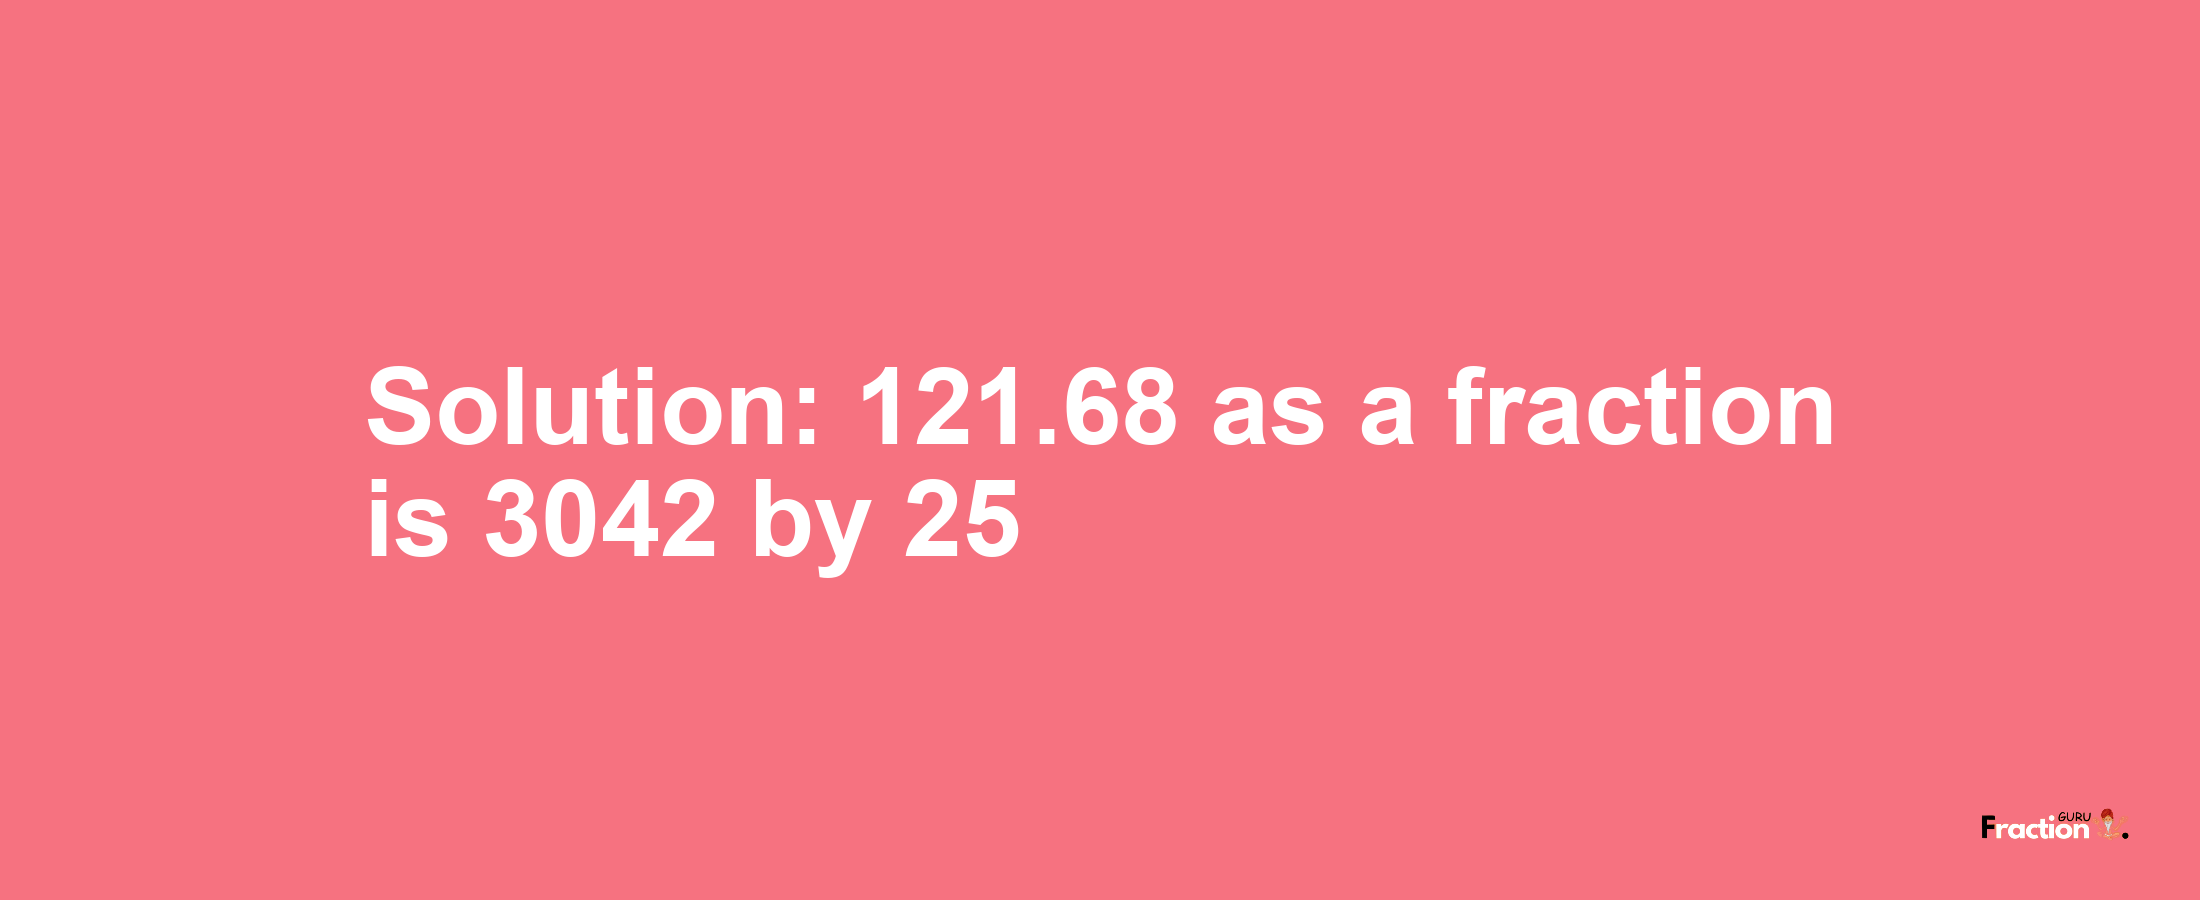 Solution:121.68 as a fraction is 3042/25